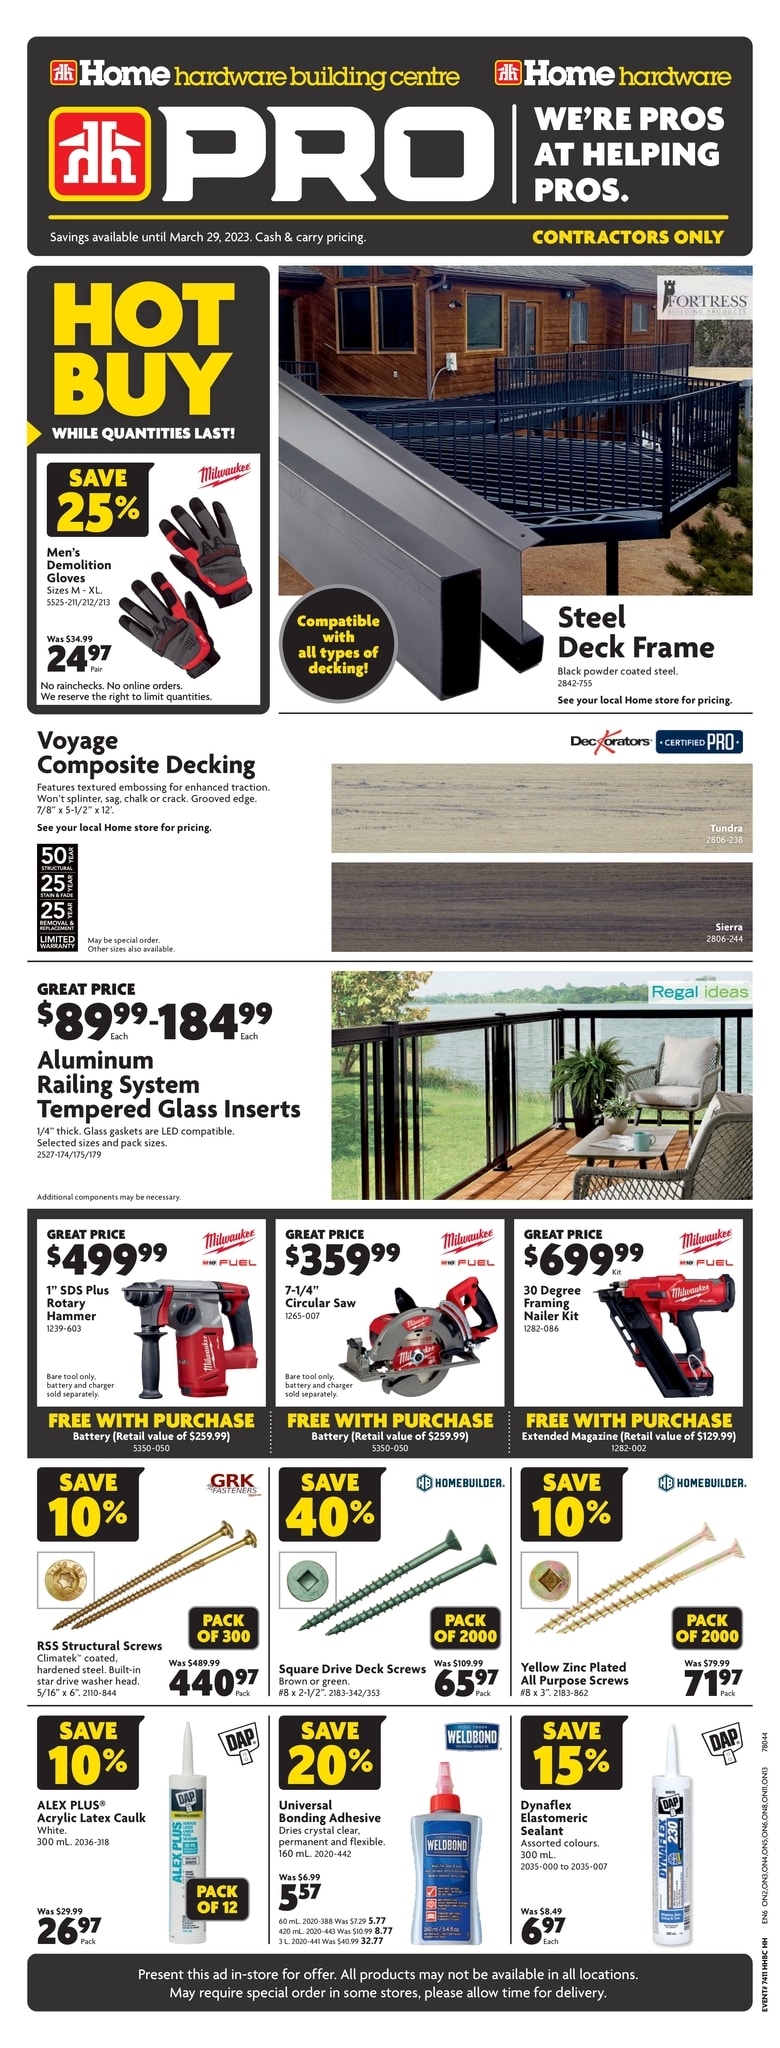 Home Hardware - PRO - Page 1